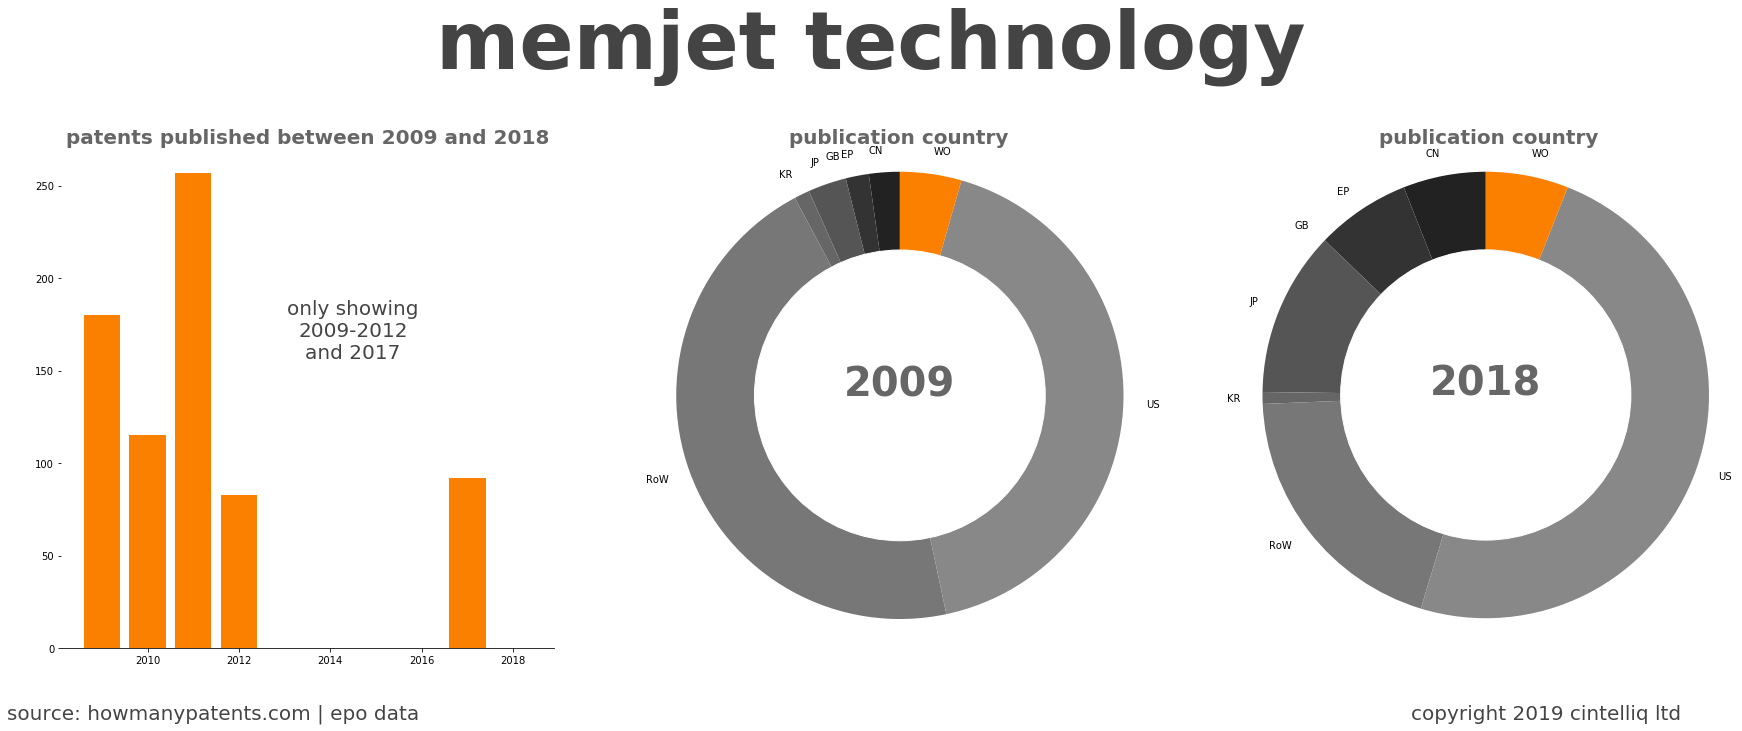 summary of patents for Memjet Technology